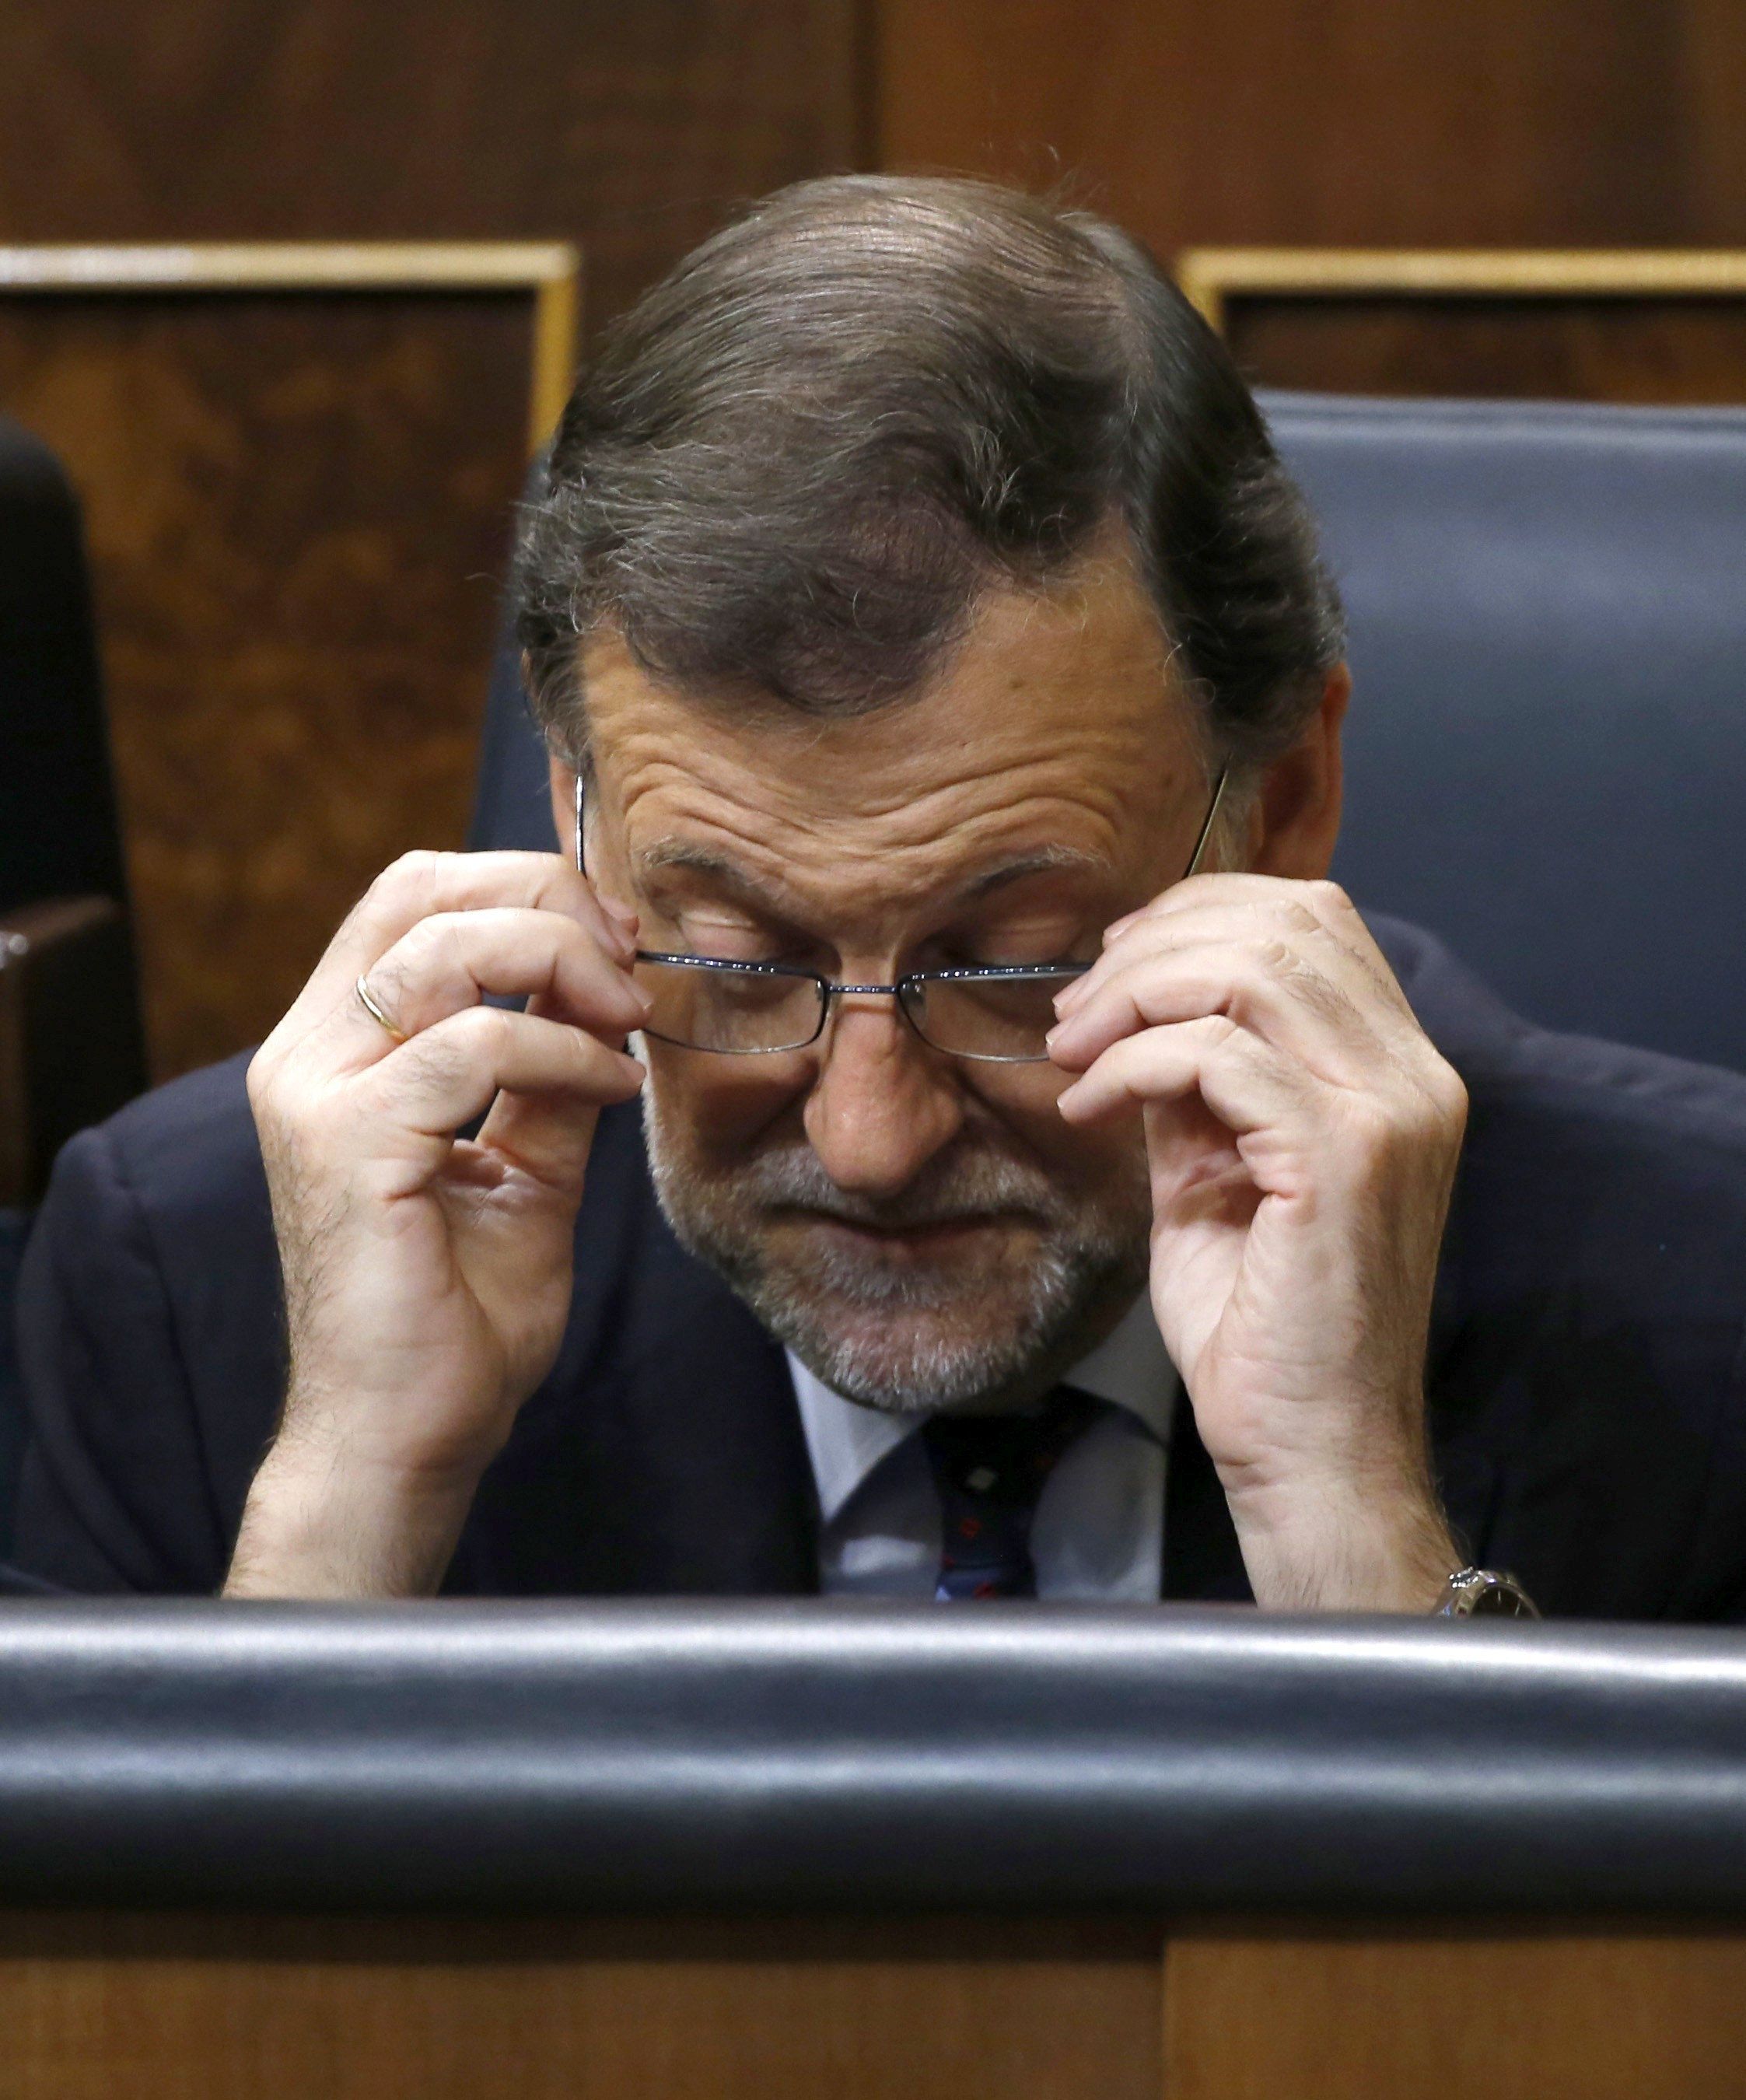 Lawsuit against Rajoy's government for blocking Puigdemont's investiture as president